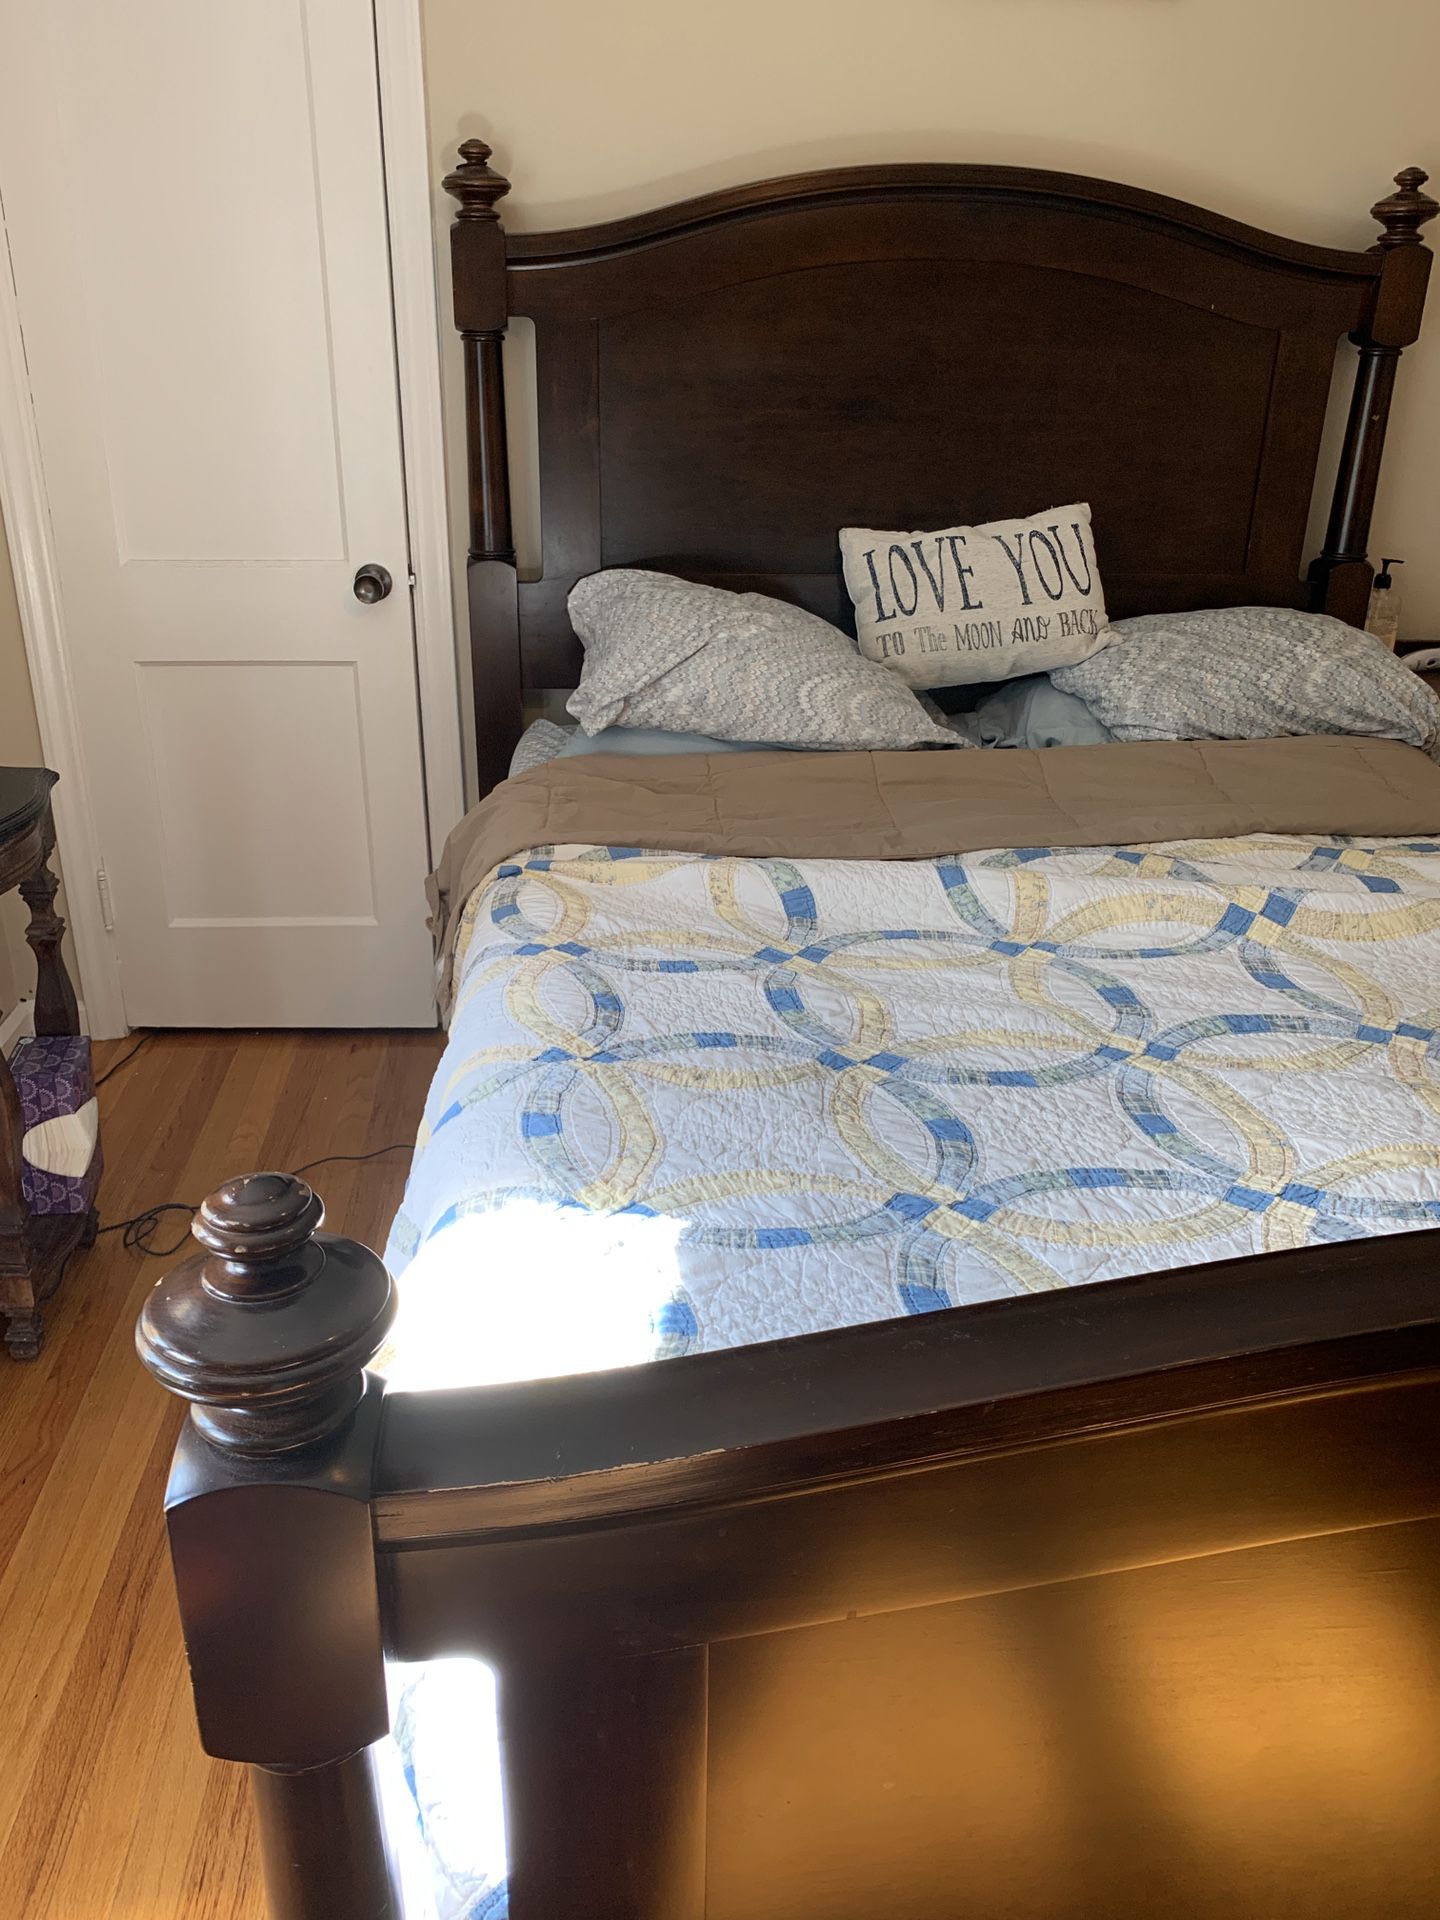 Pottery barn queen bed frame and box spring